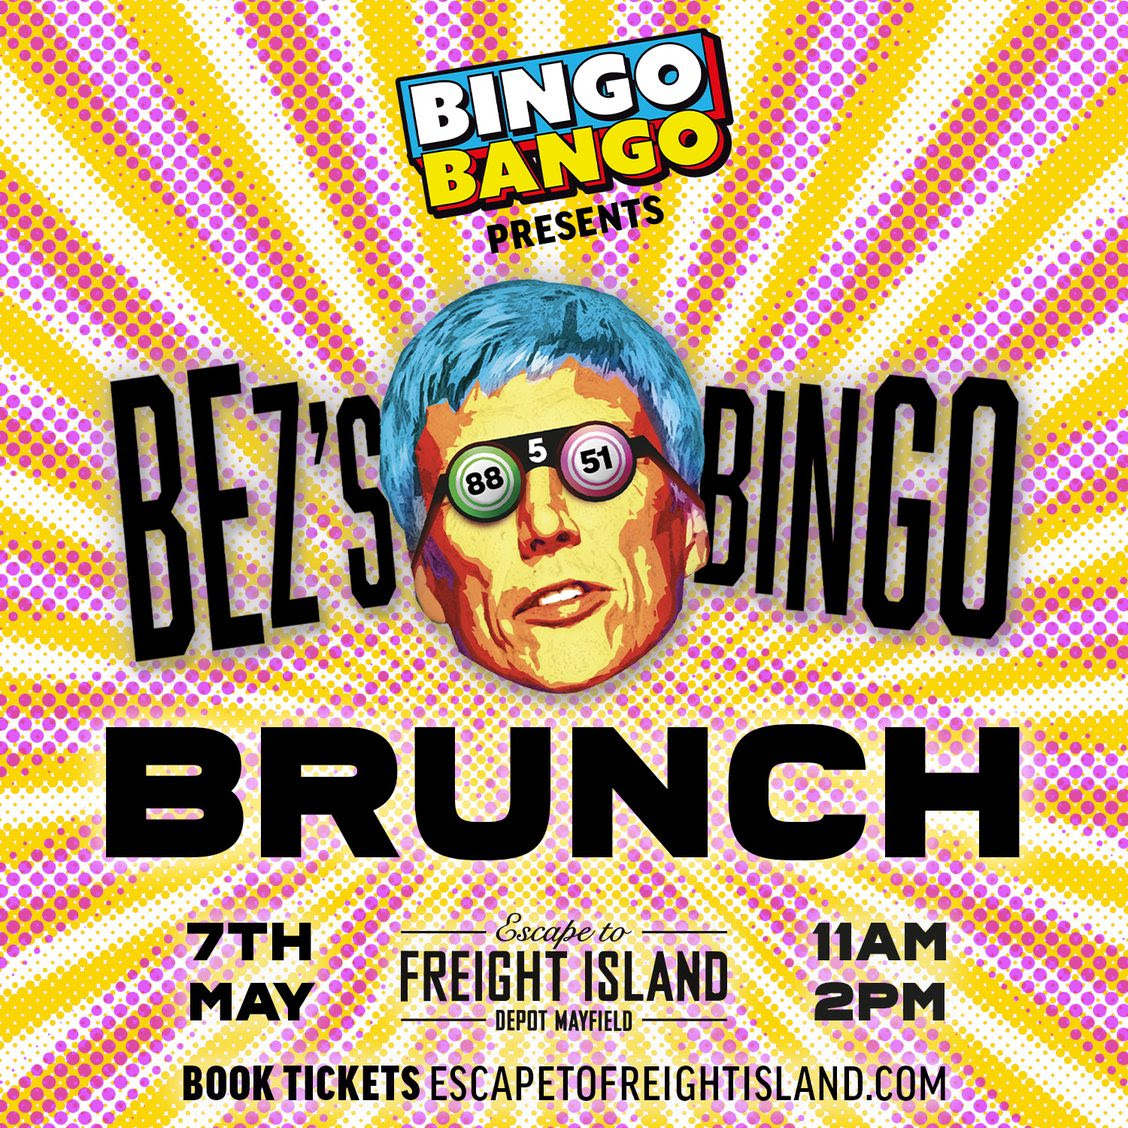 Bez is hosting a bottomless bingo brunch in Manchester, The Manc